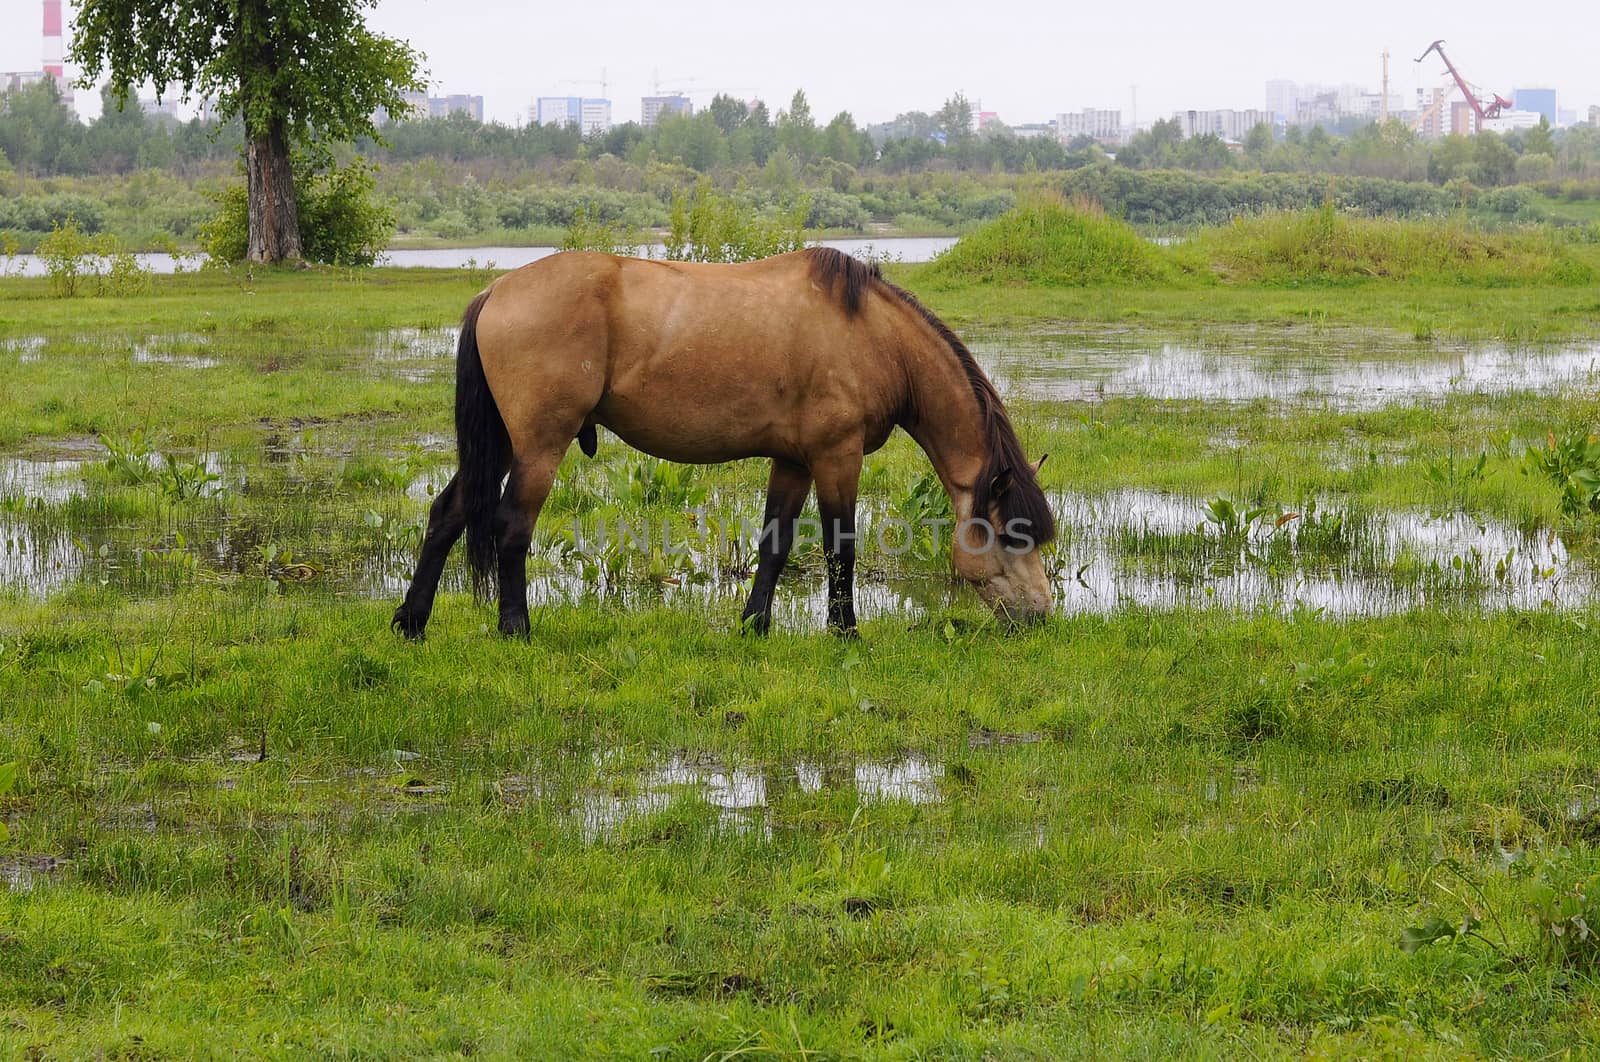 The bay horse is grazed on a meadow